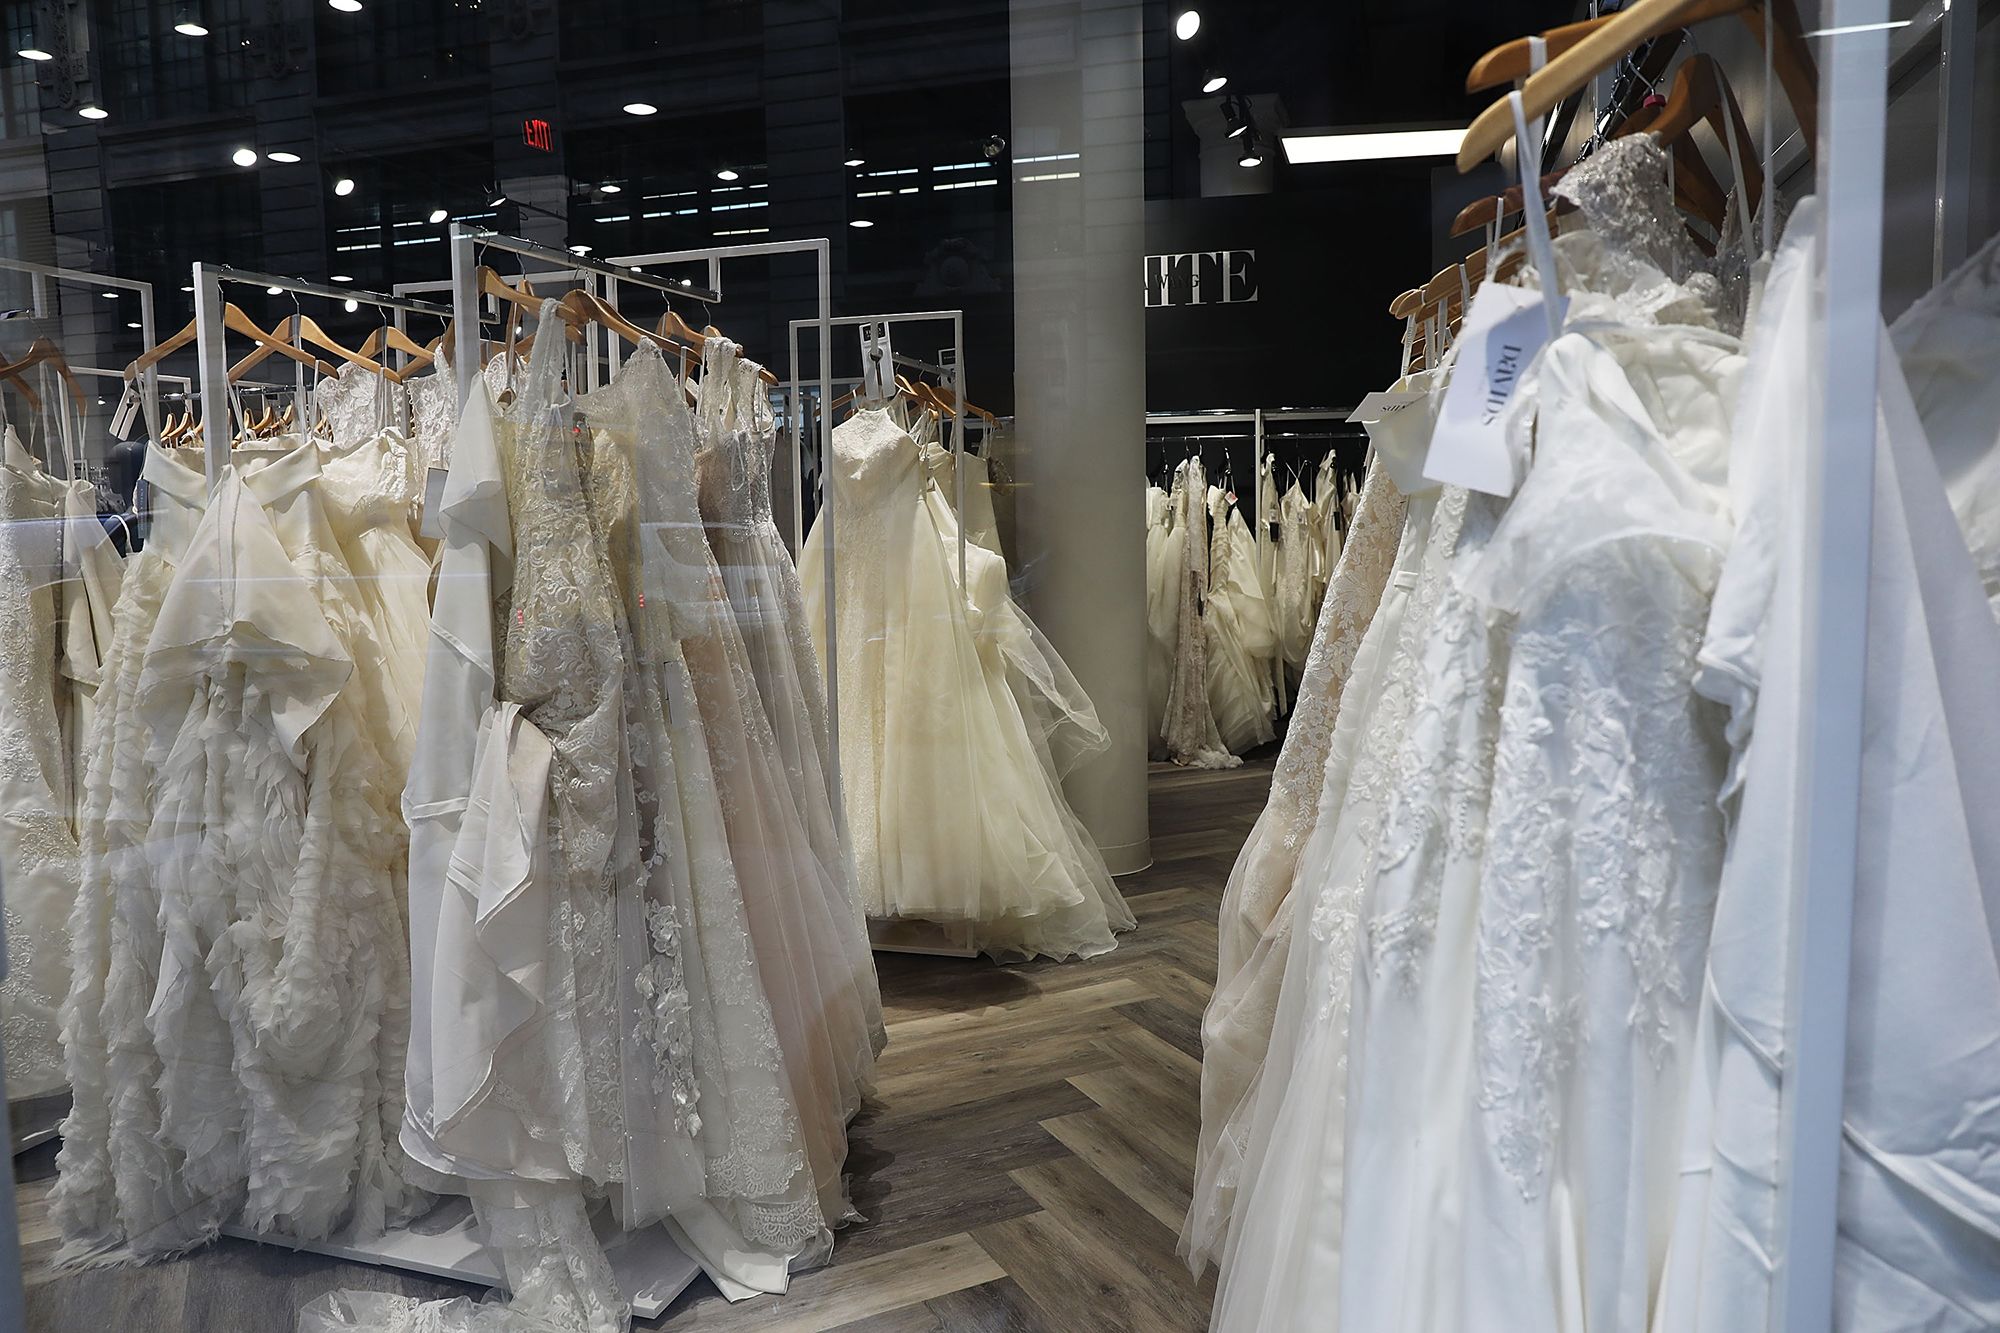 David's Bridal much-needed revival could follow acquisition